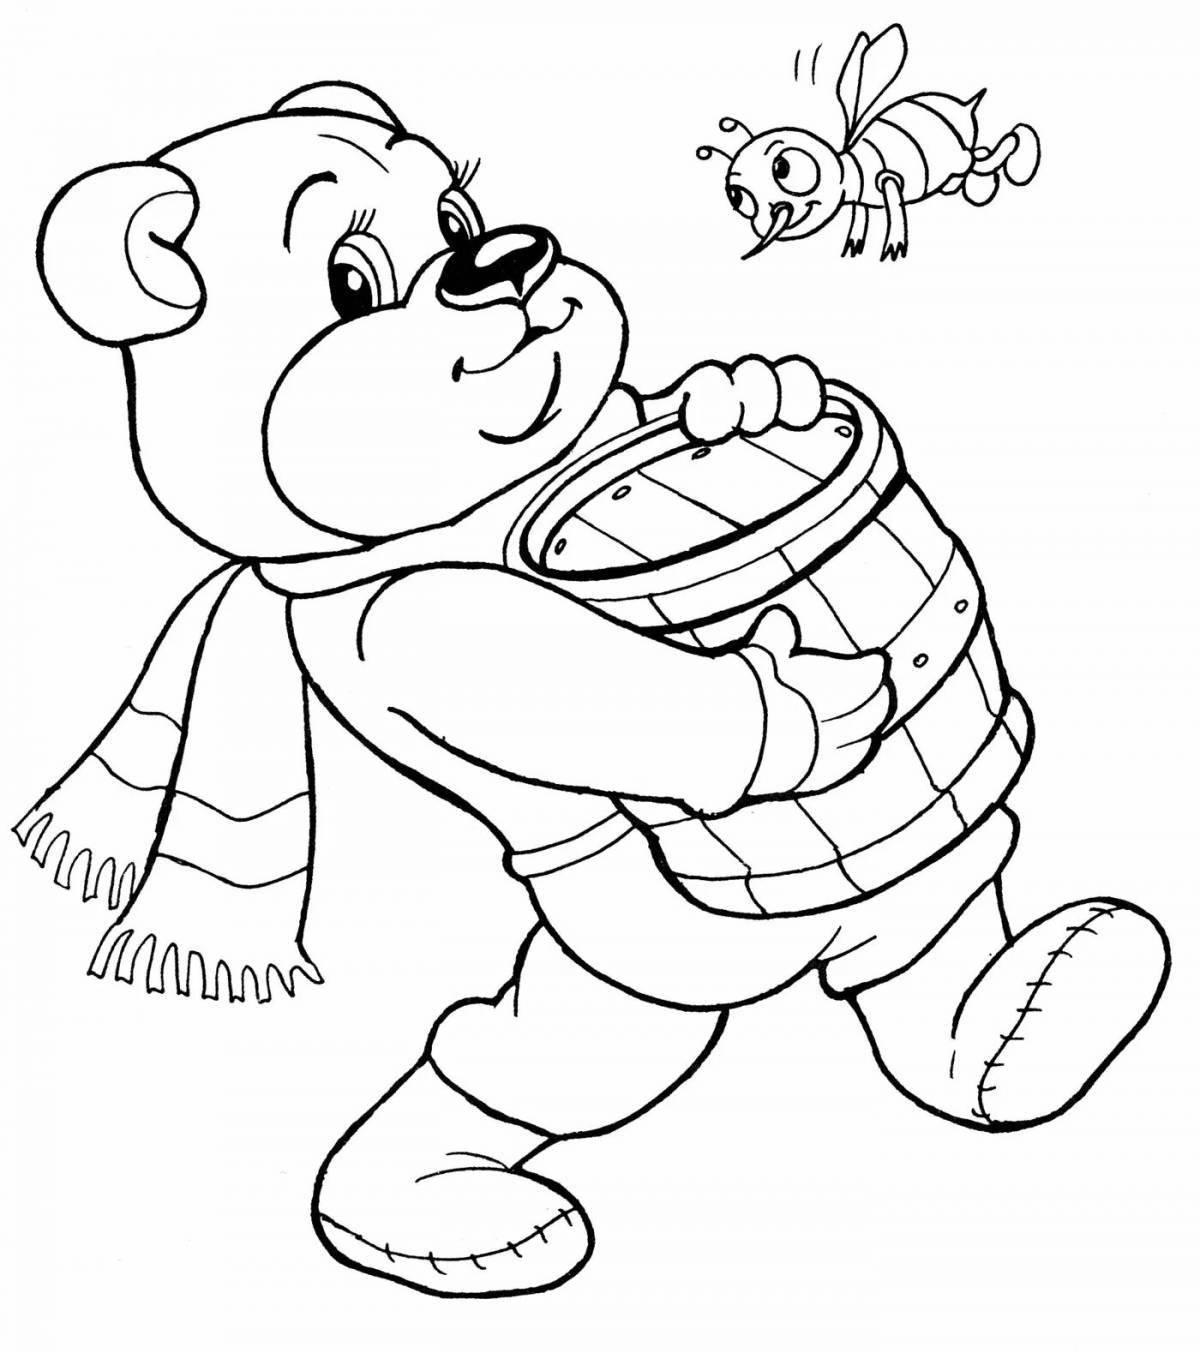 Colorful bear with honey coloring book